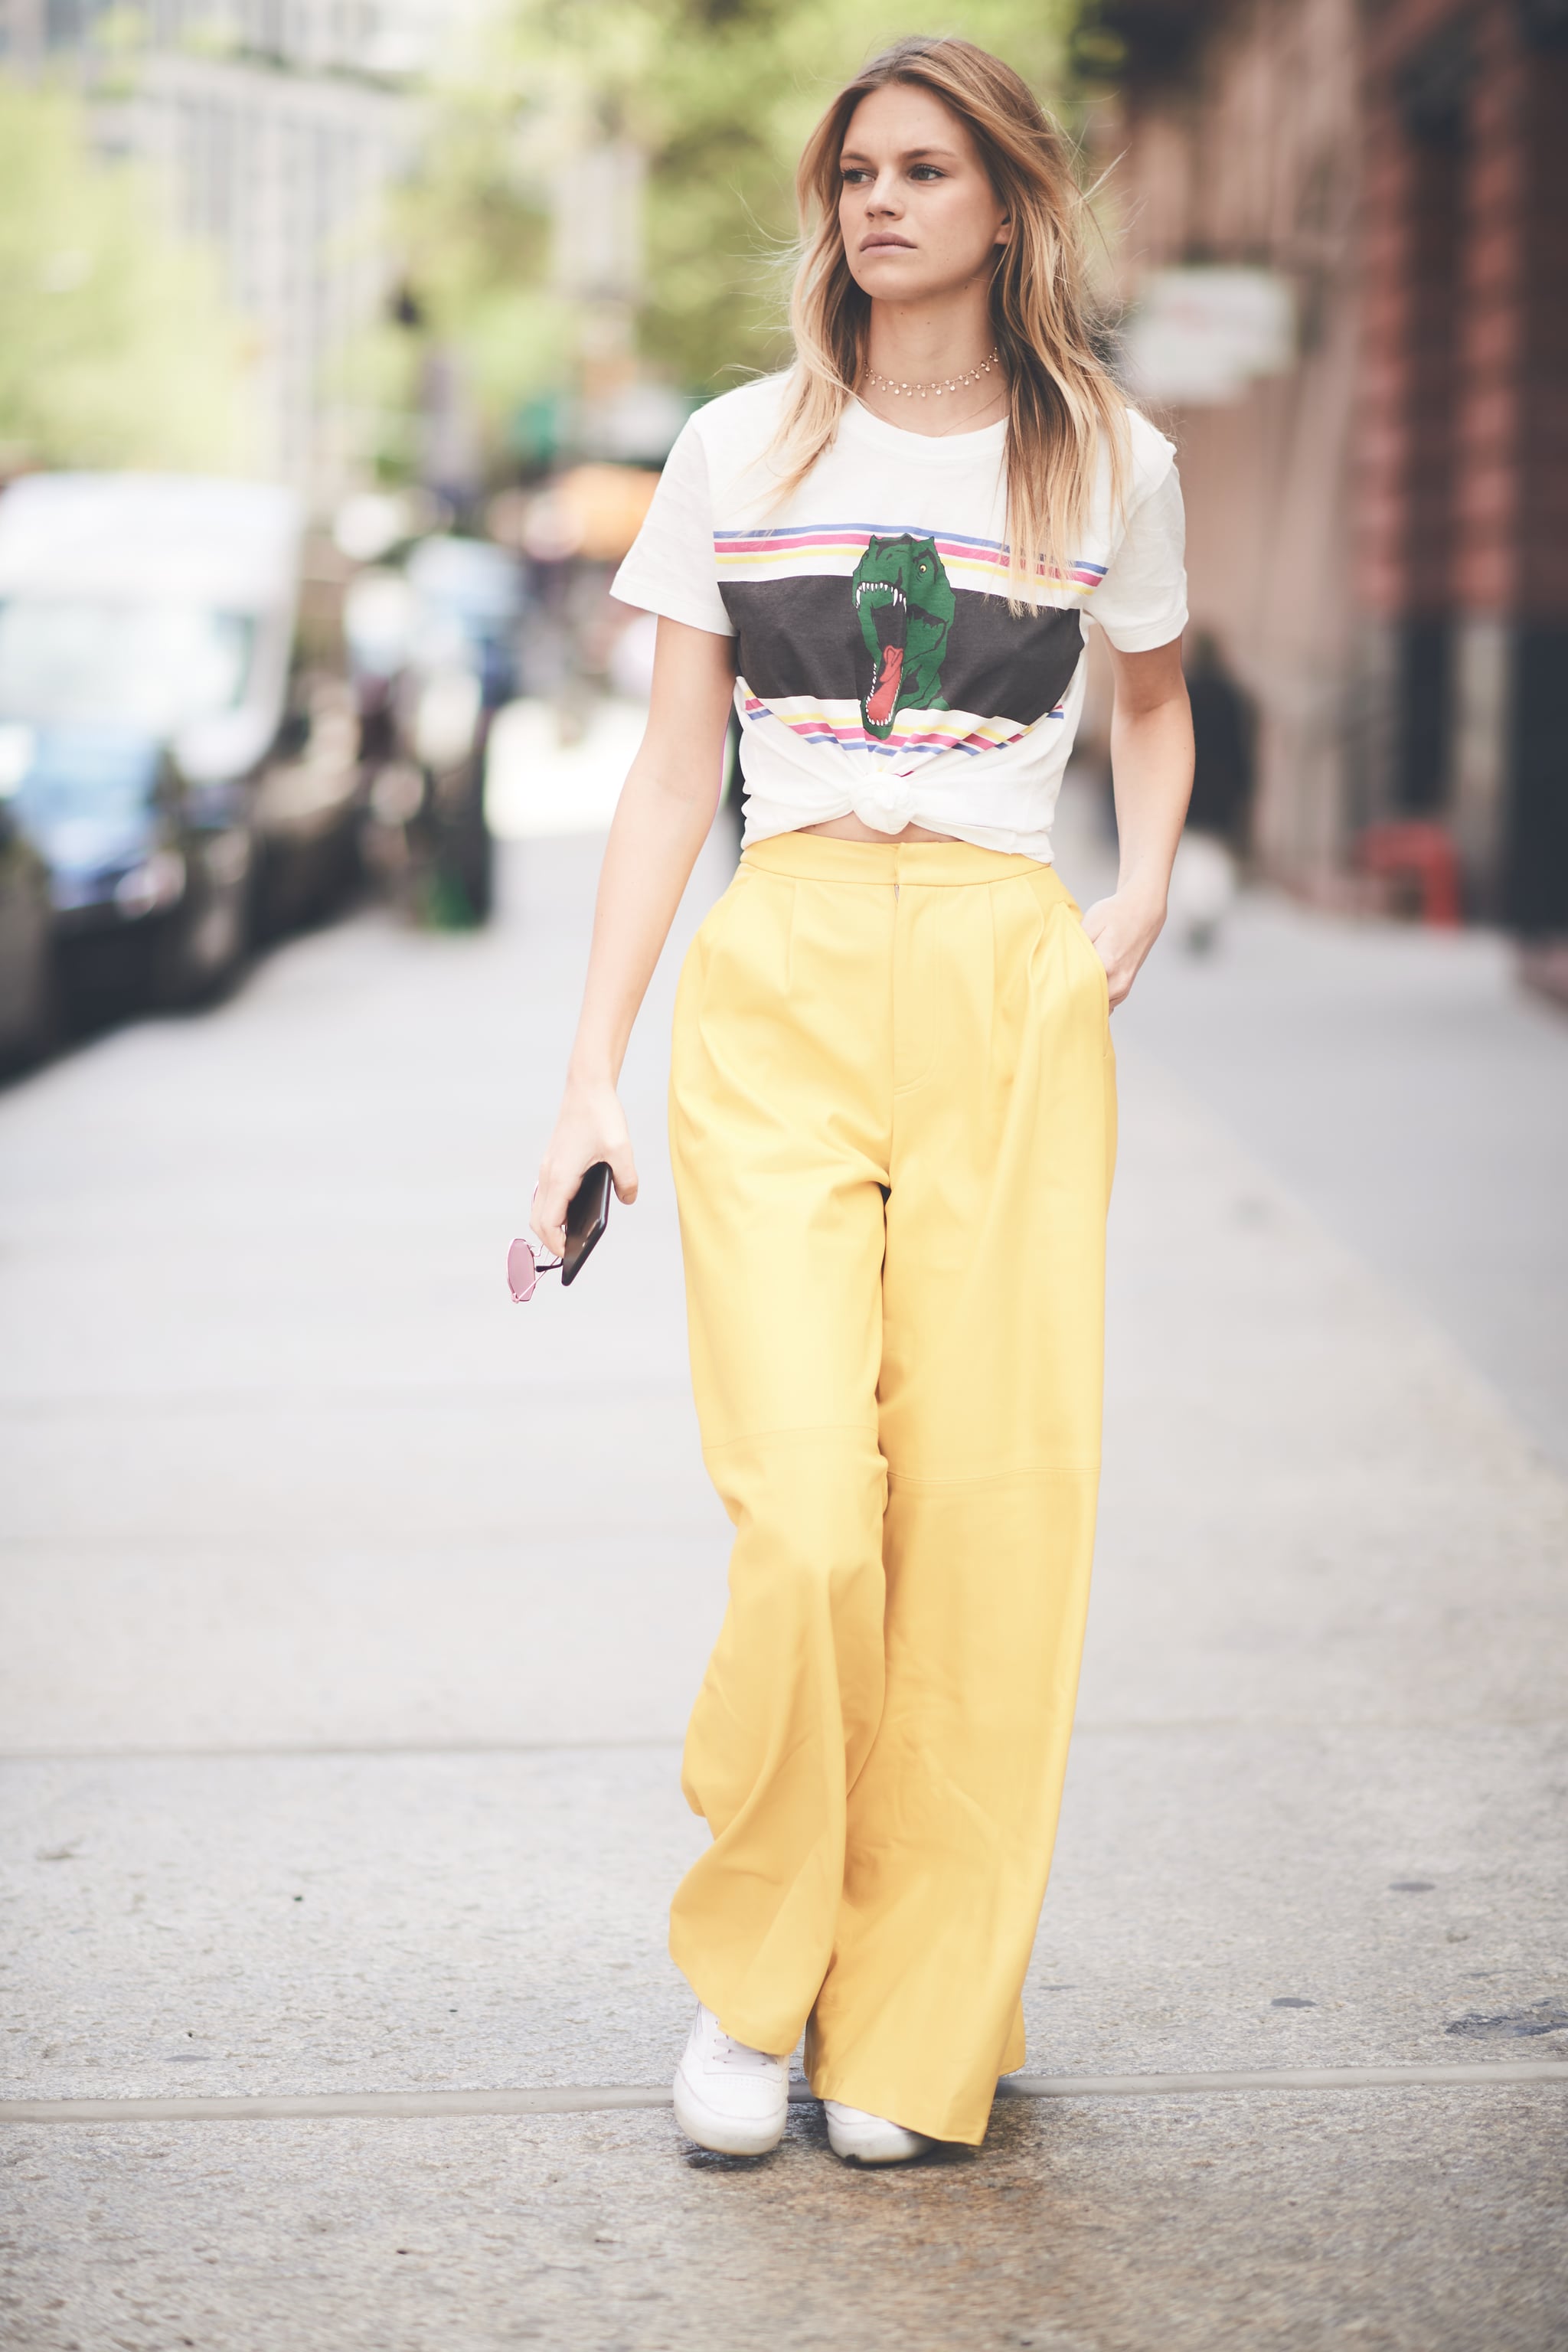 Brighten Up Your Mood With a Pair of Yellow Pants, 27 Stylish and  Comfortable Outfit Ideas For POPSUGAR Play/Ground